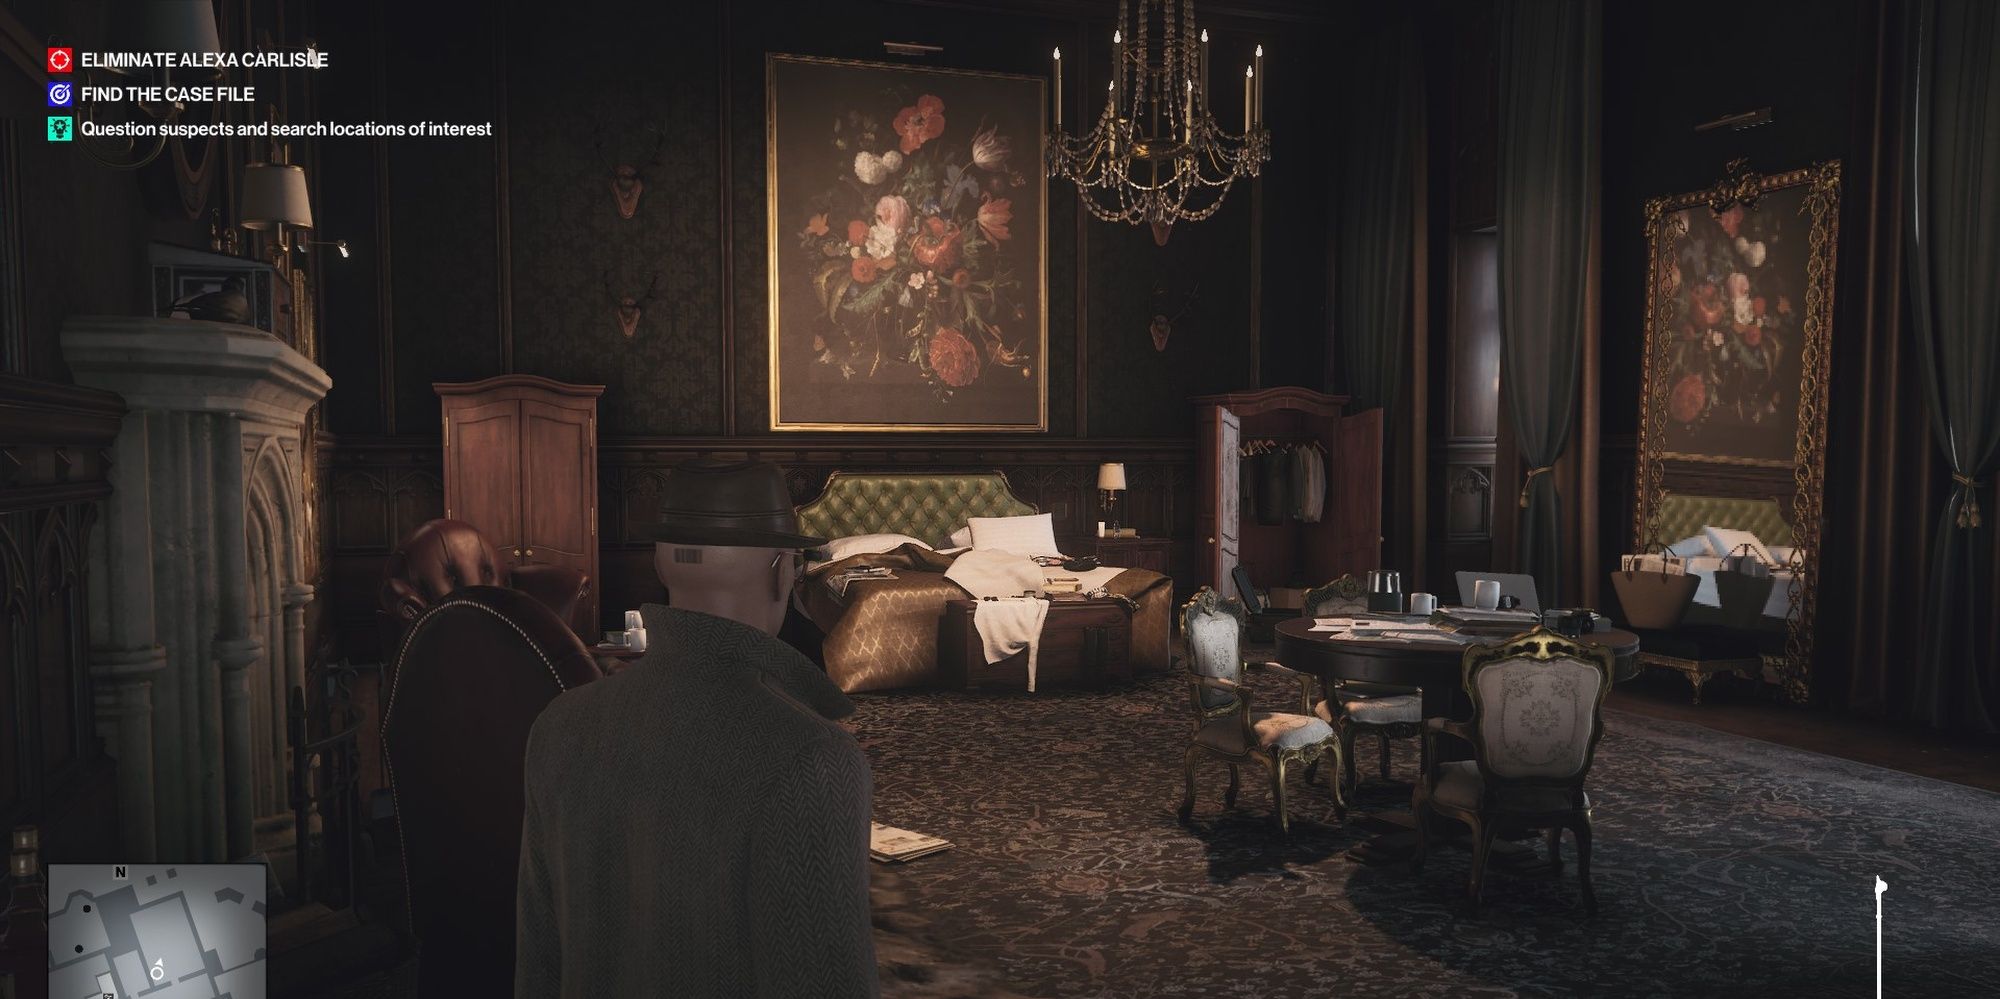 hitman means motive and opportunity rebeccas room